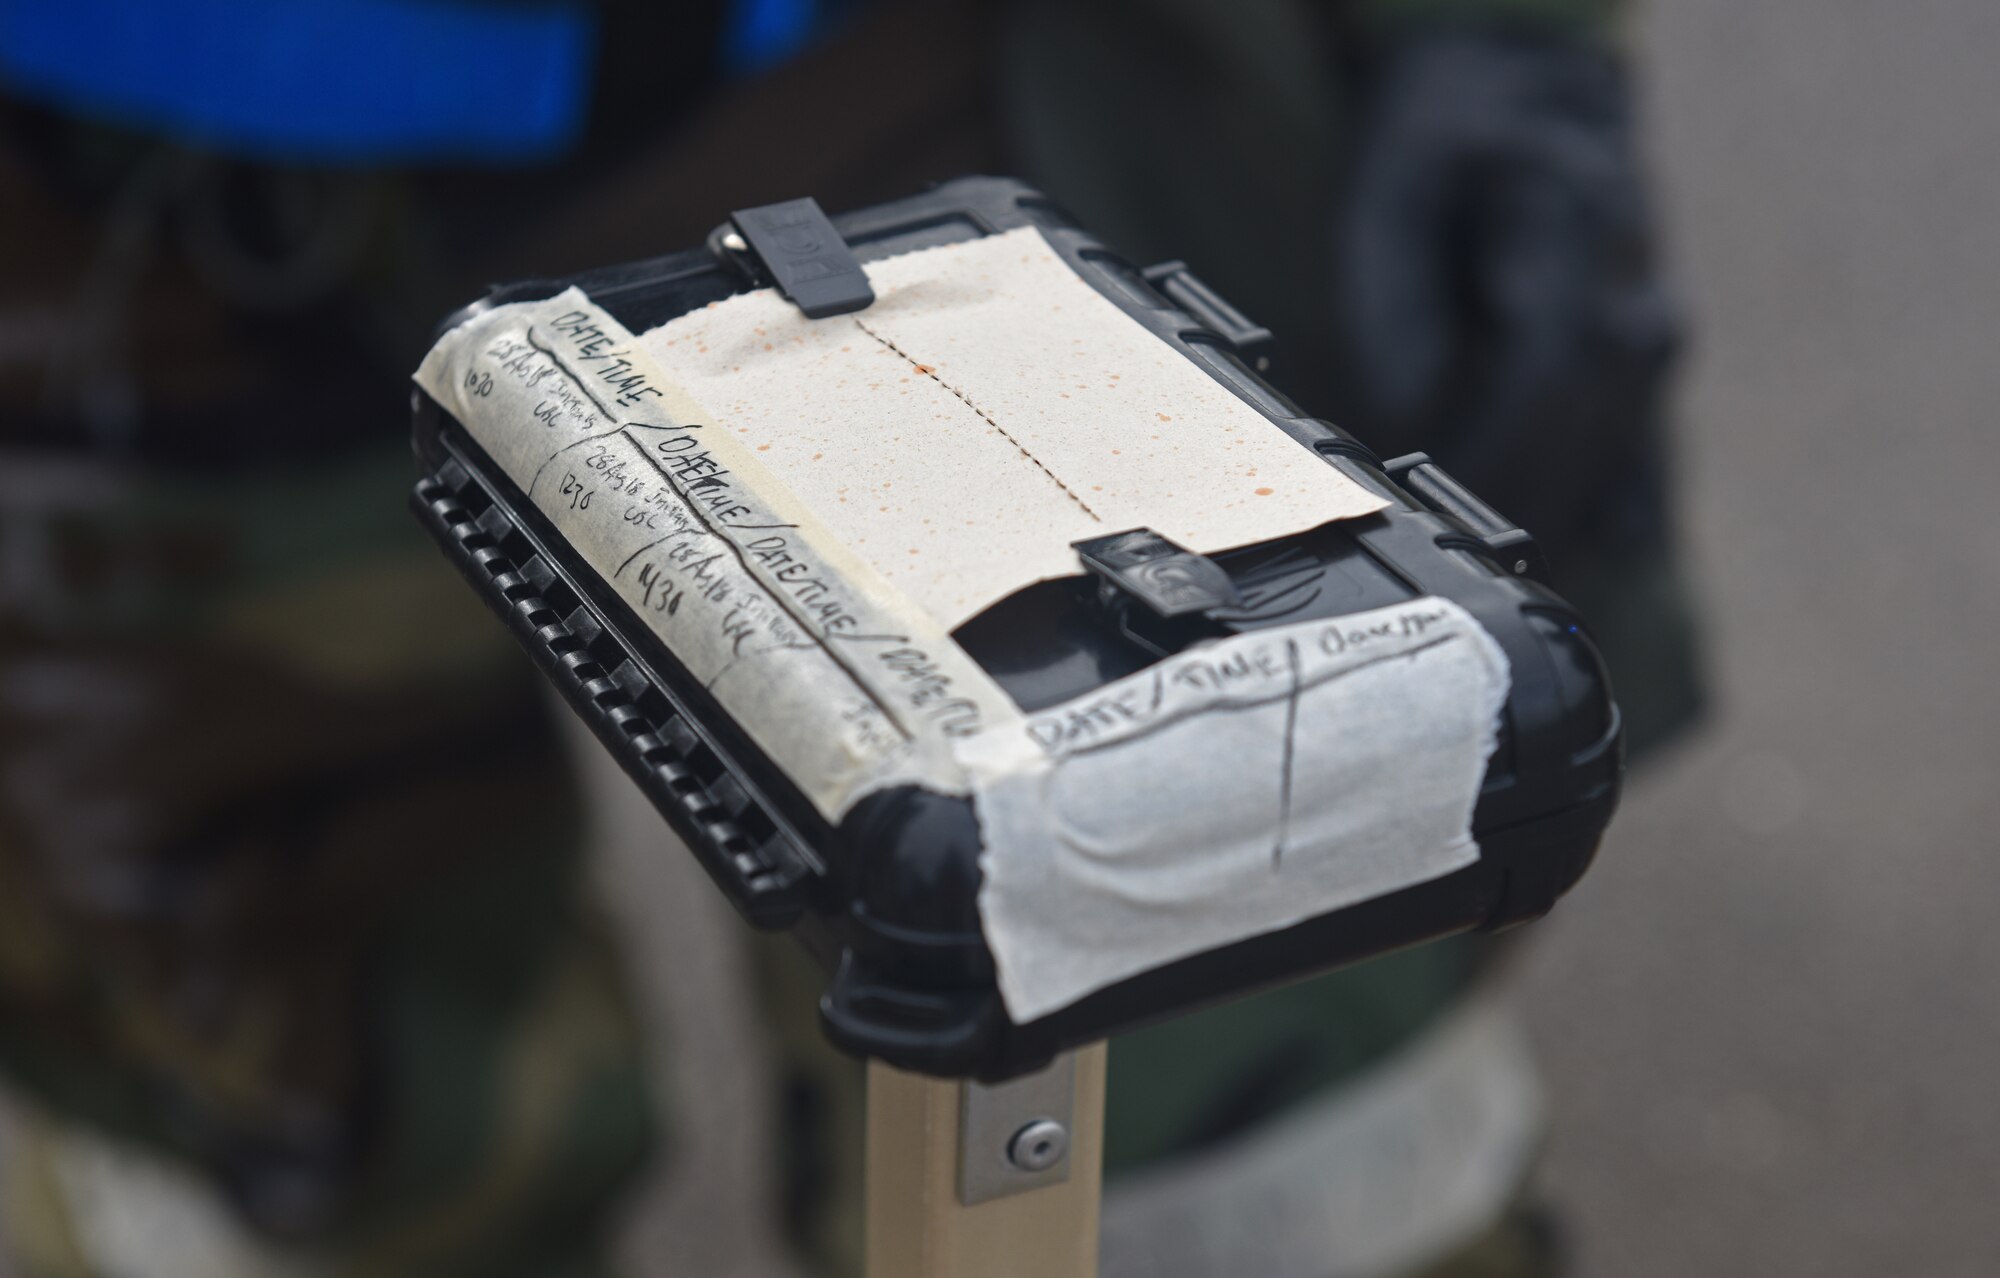 M8 chemical agent detector paper is examined by a post attack reconnaissance team during a mission assurance exercise at RAF Mildenhall, England, Aug. 28, 2018. RAF Mildenhall performs exercises so Airmen are able to display their capabilities and prepare for real-world scenarios. (U.S. Air Force photo by Airman 1st Class Brandon Esau)